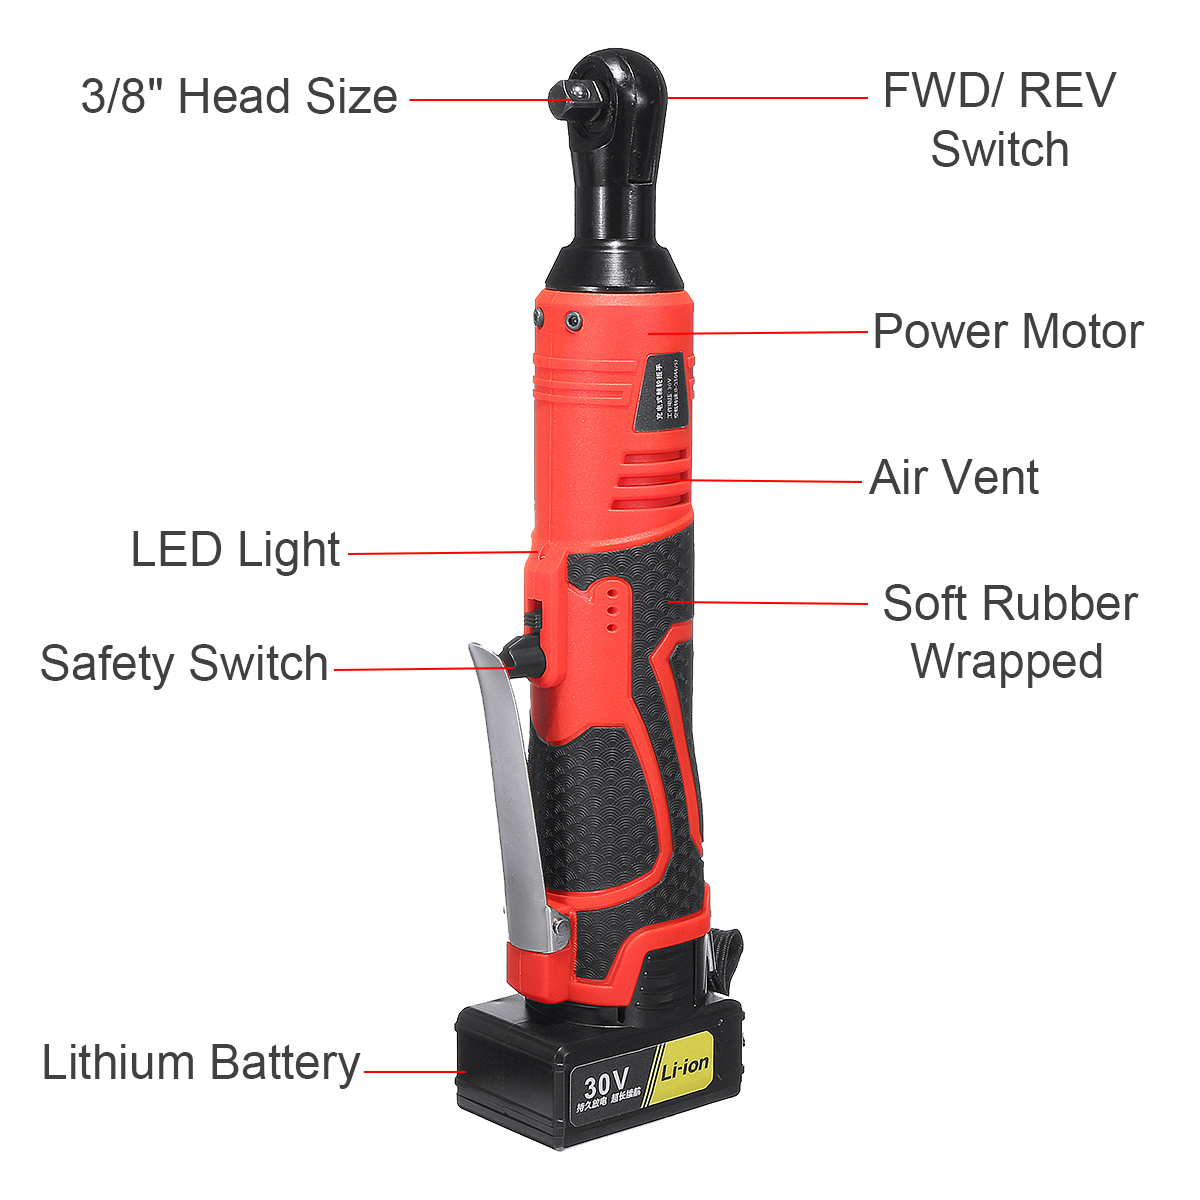 30V18V-2-Li-ion-Battery-Electric-Wrench-Cordless-Right-Ratchet-Angle-Wrench-Power-Tool-1553047-7